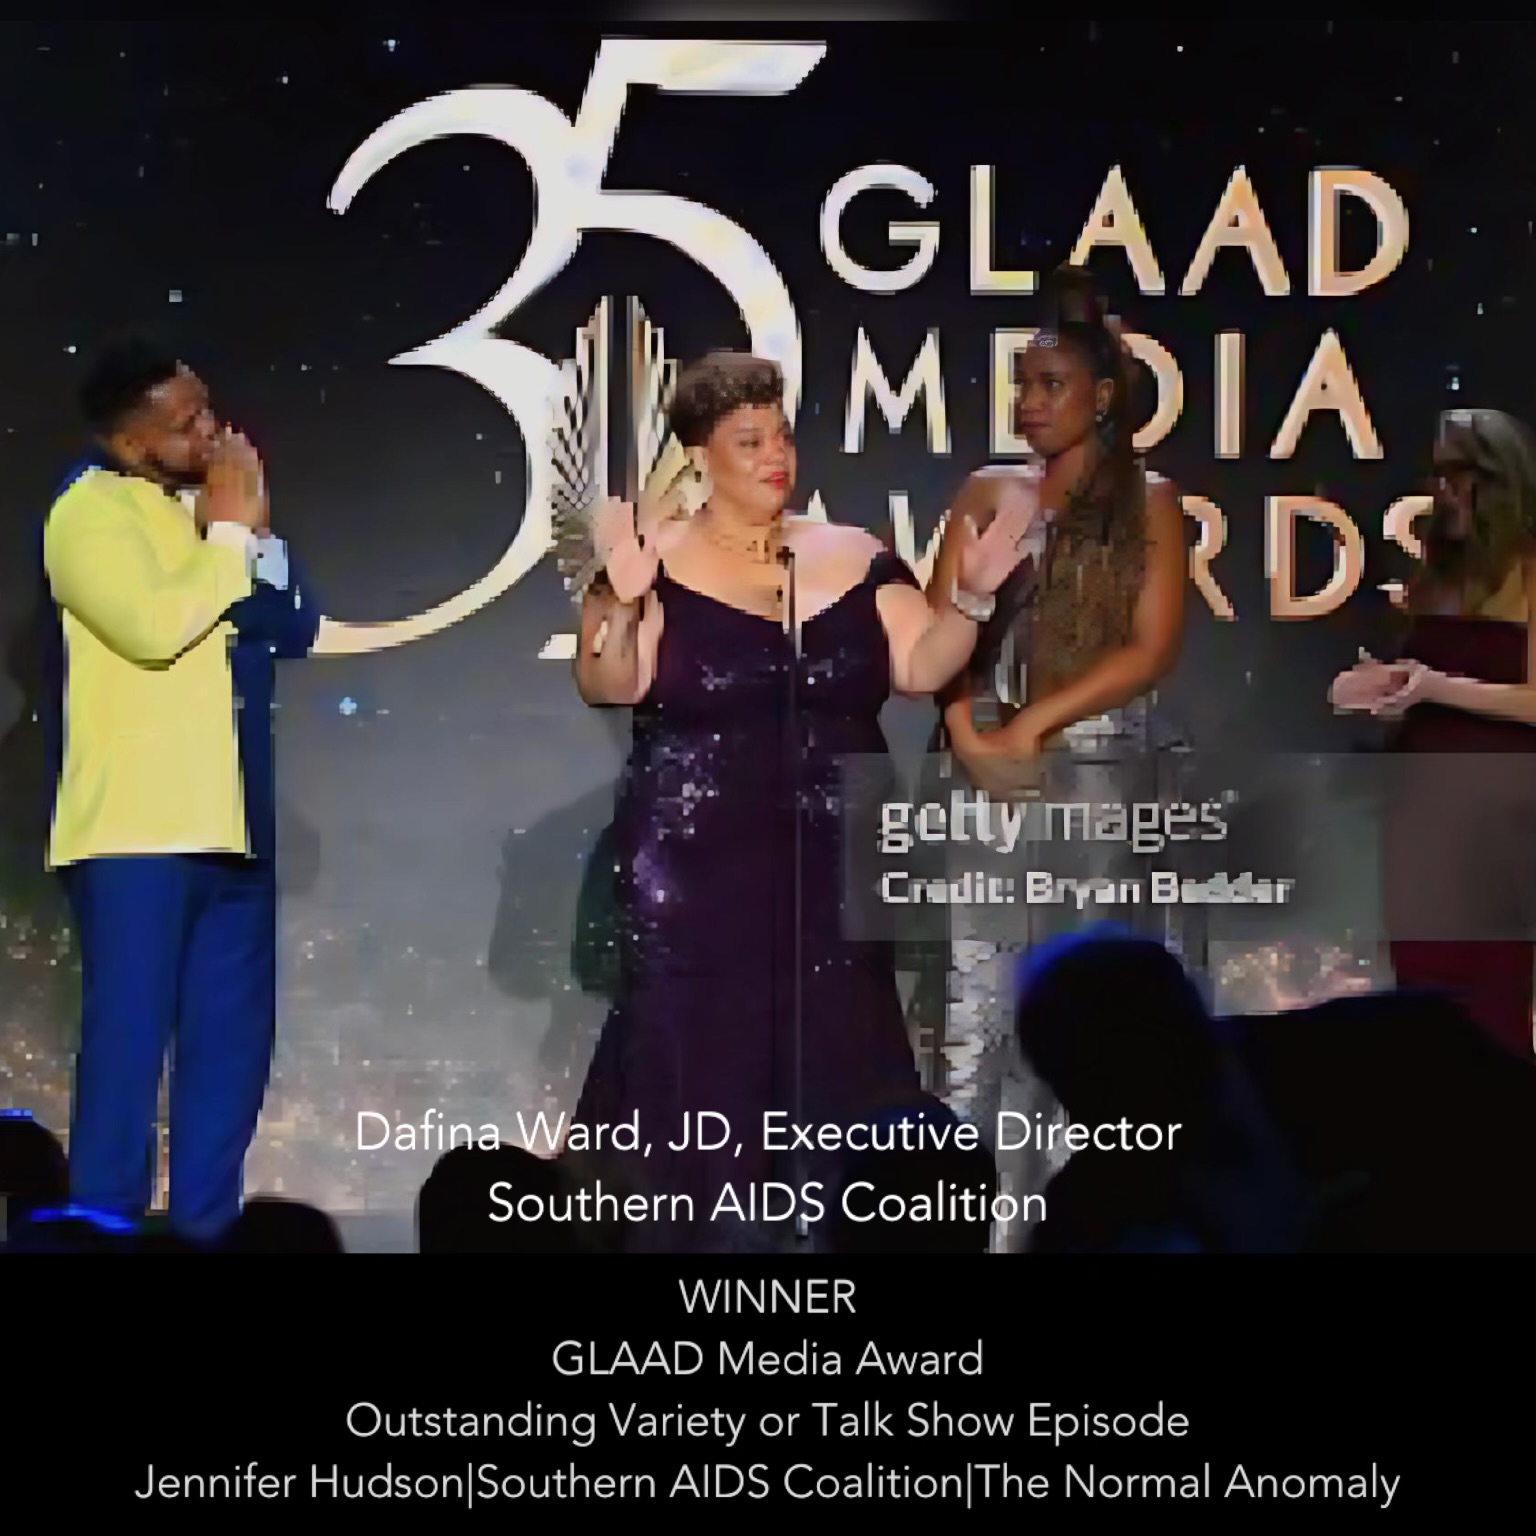 Ian Haddock from The Normal Anomaly, Jennifer Hudson, and Dafina Ward, Executive Director of Southern AIDS Coalition. Winner GLAAD media award outstanding talk show